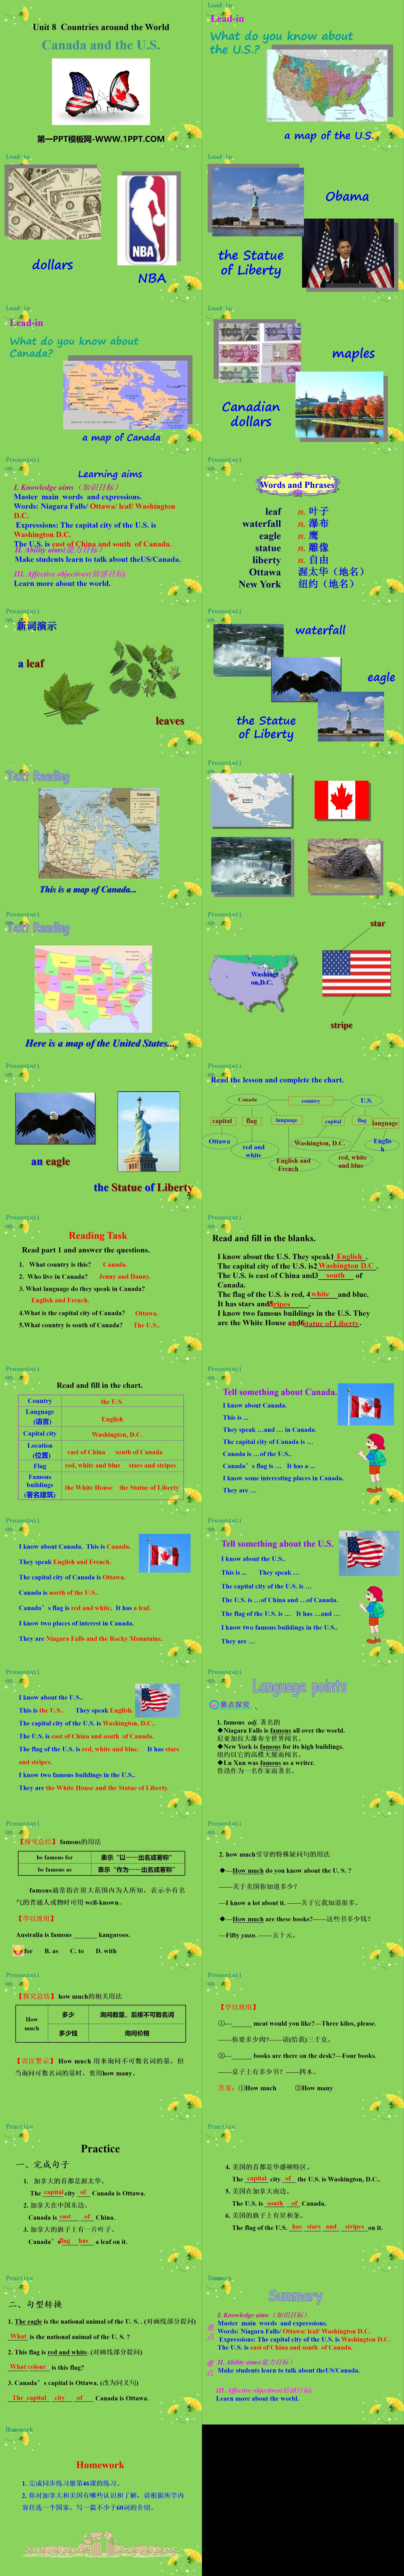 《Canada and the U.S.》Countries around the World PPT免费课件
（2）